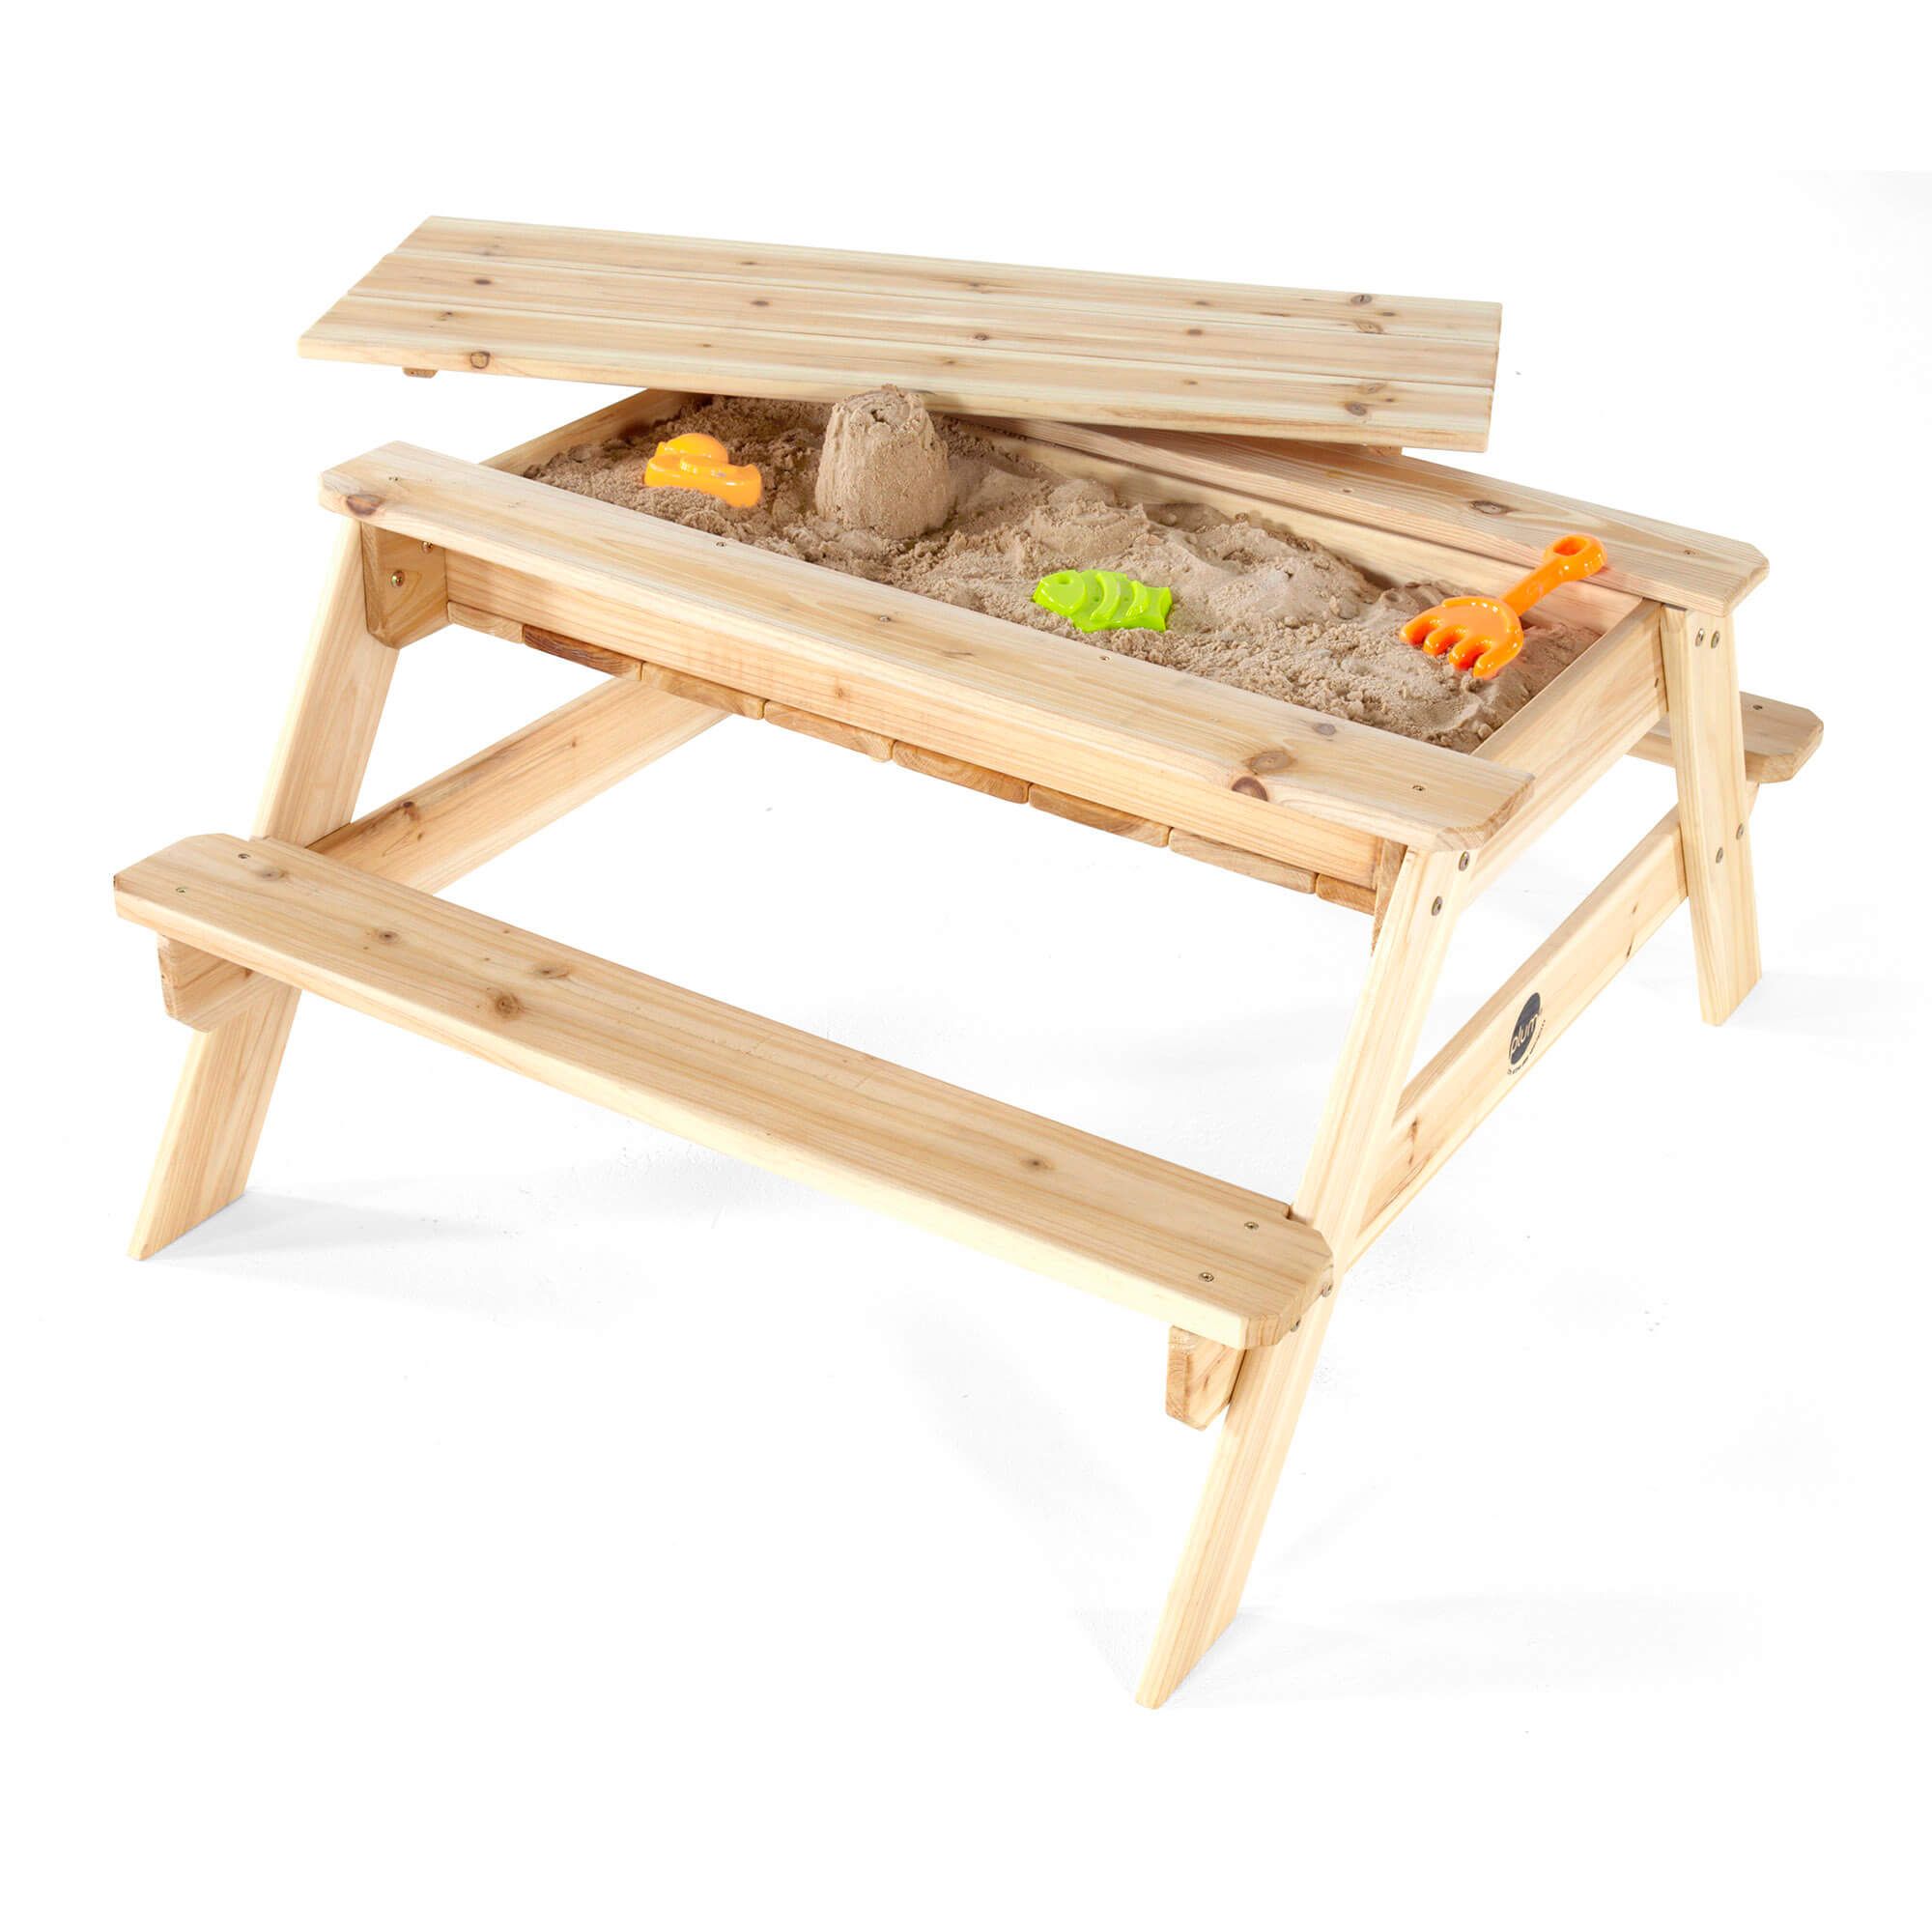 Plum Play Wooden Sand and Picnic Table for Kids